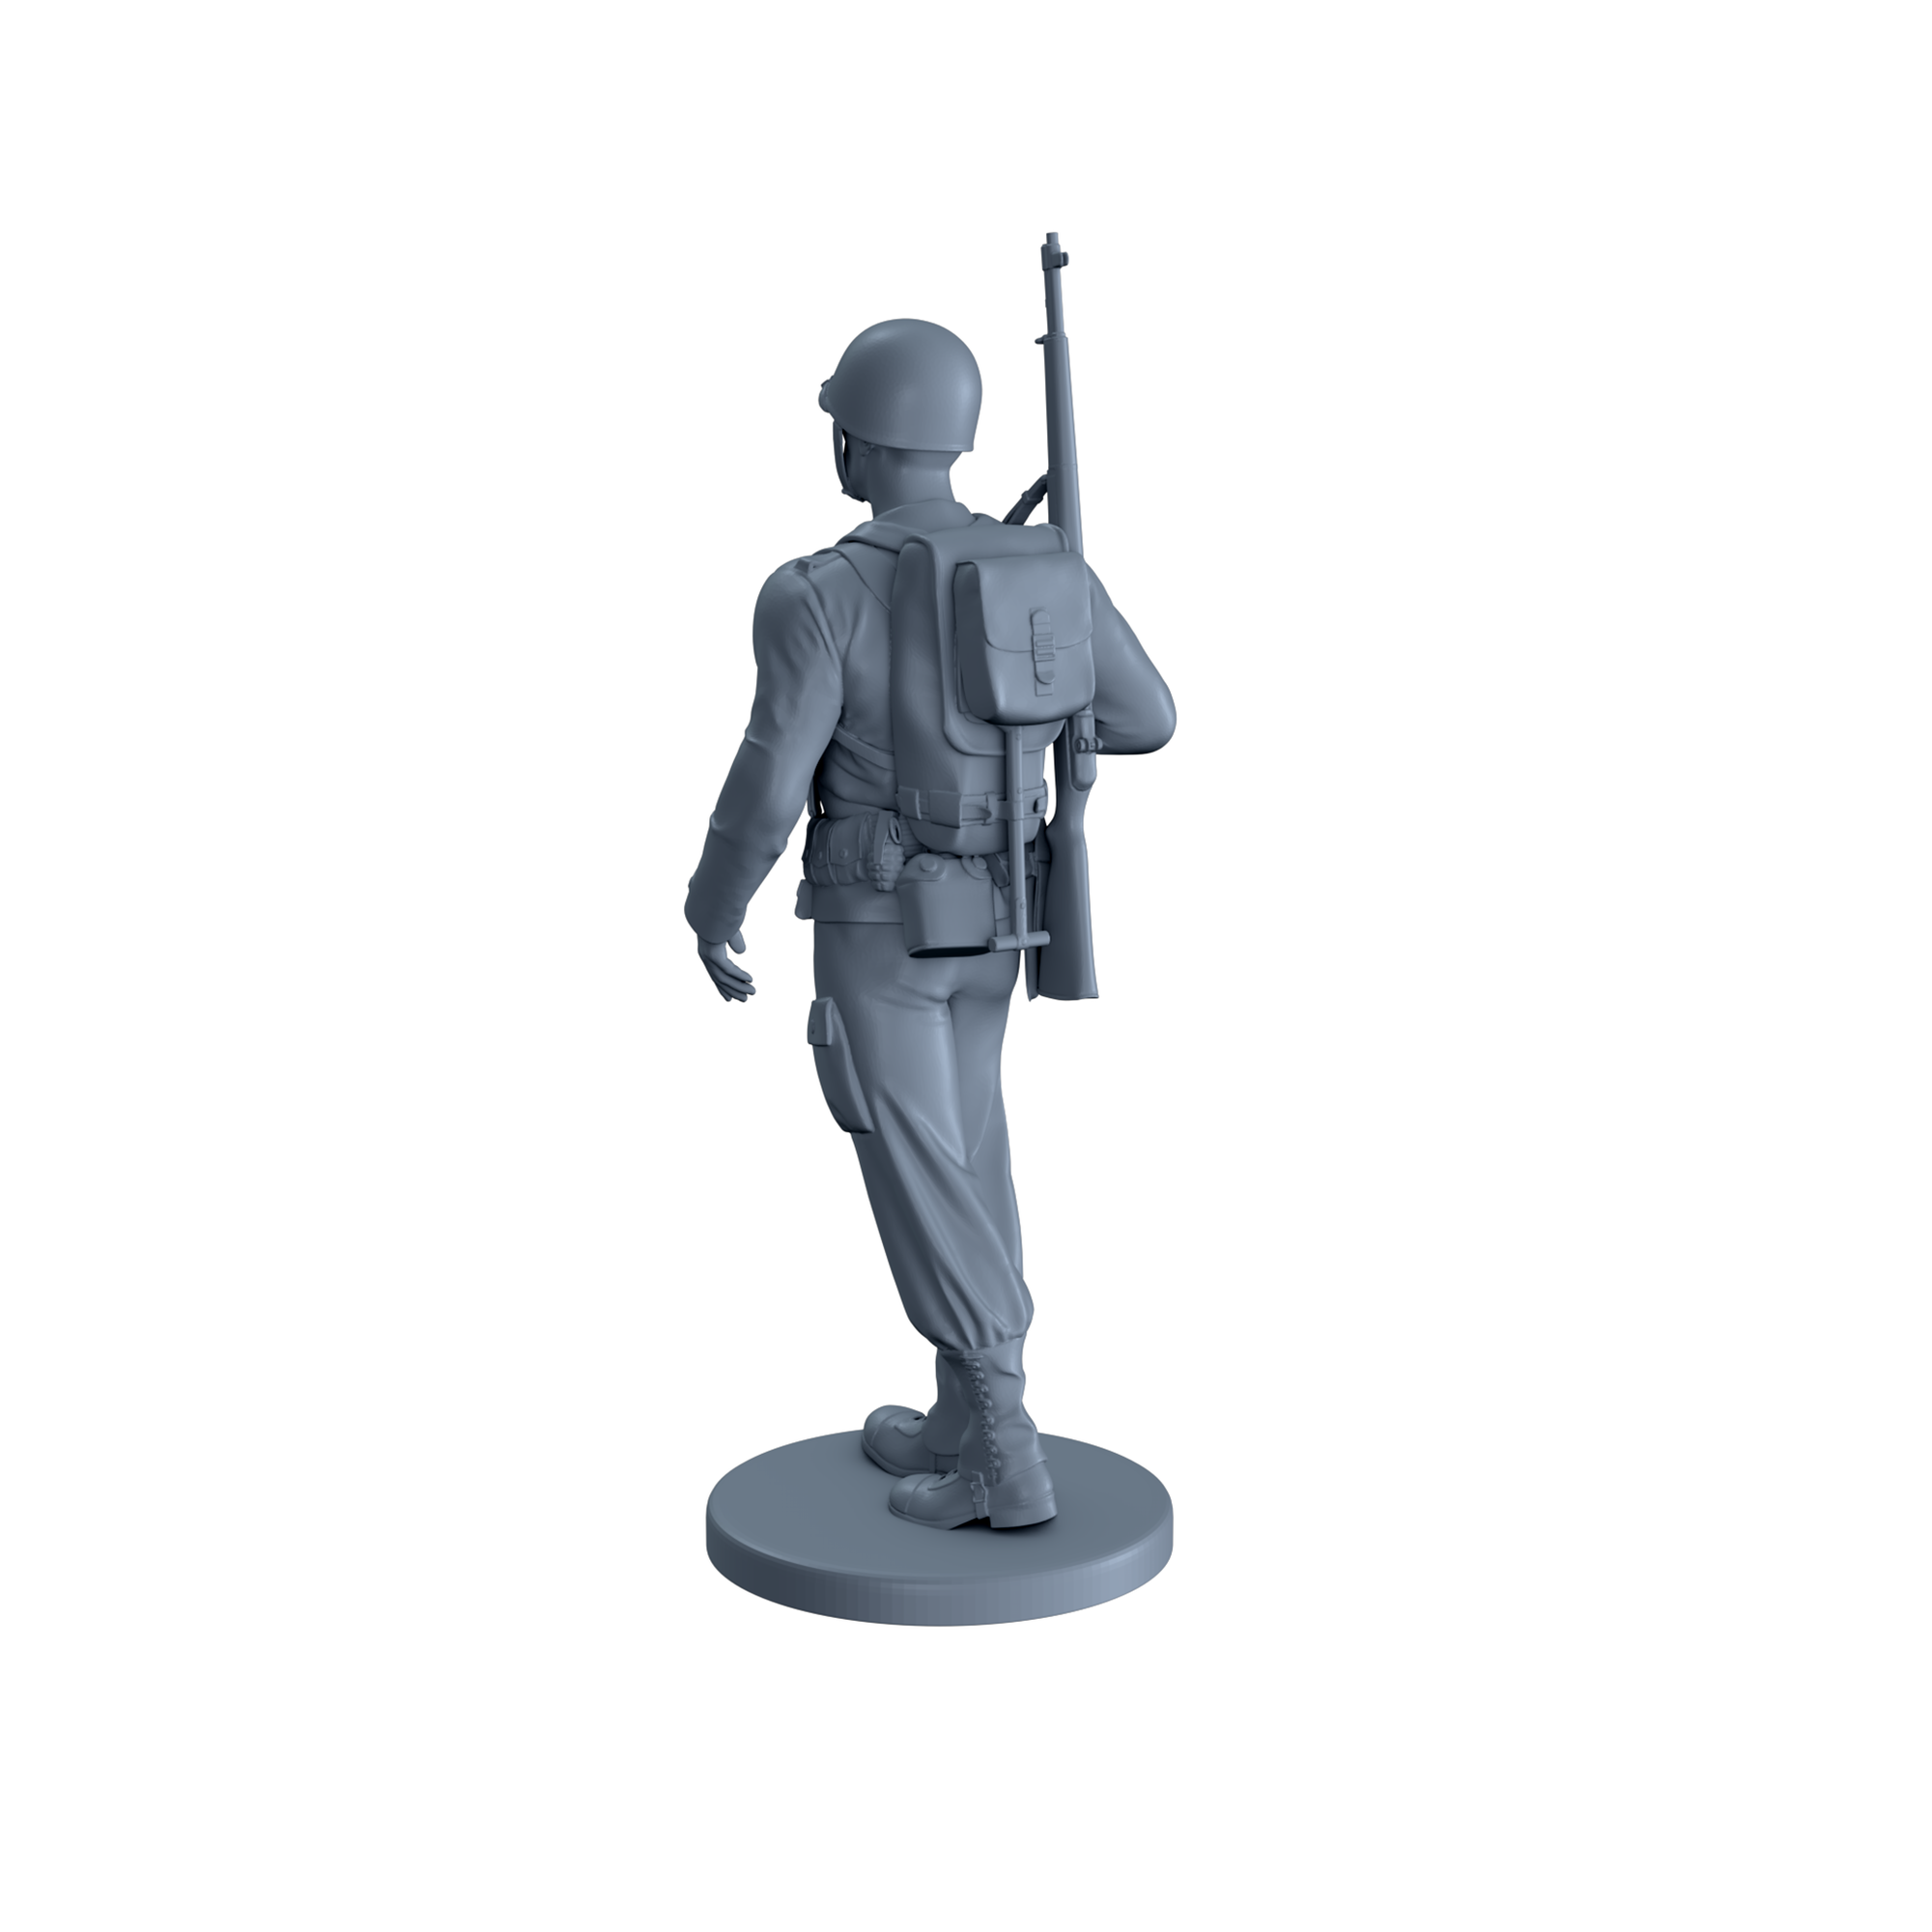 American Soldier Walking with Gun on Back